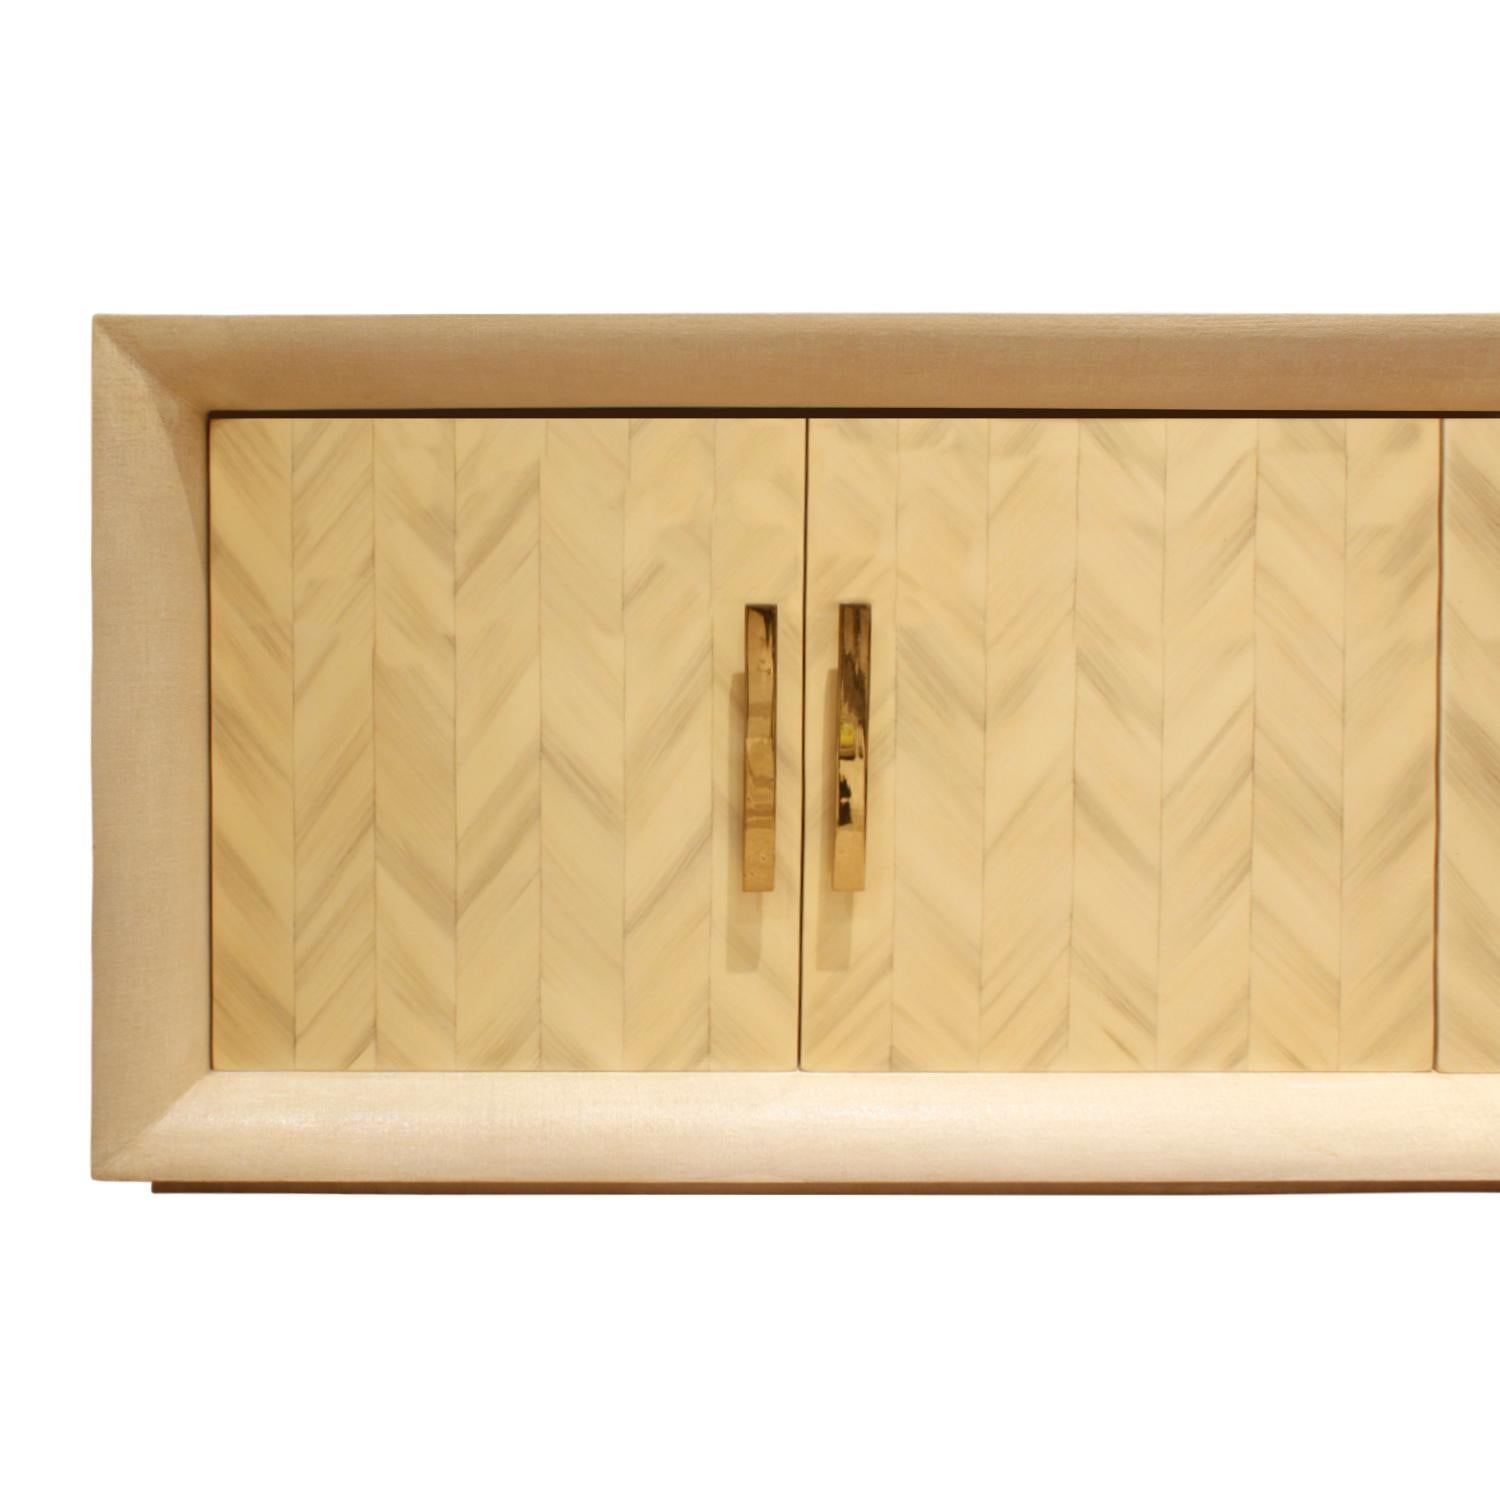 Mid-Century Modern Large Lacquered Linen Credenza with Herringbone Lacquer Doors, 1970s